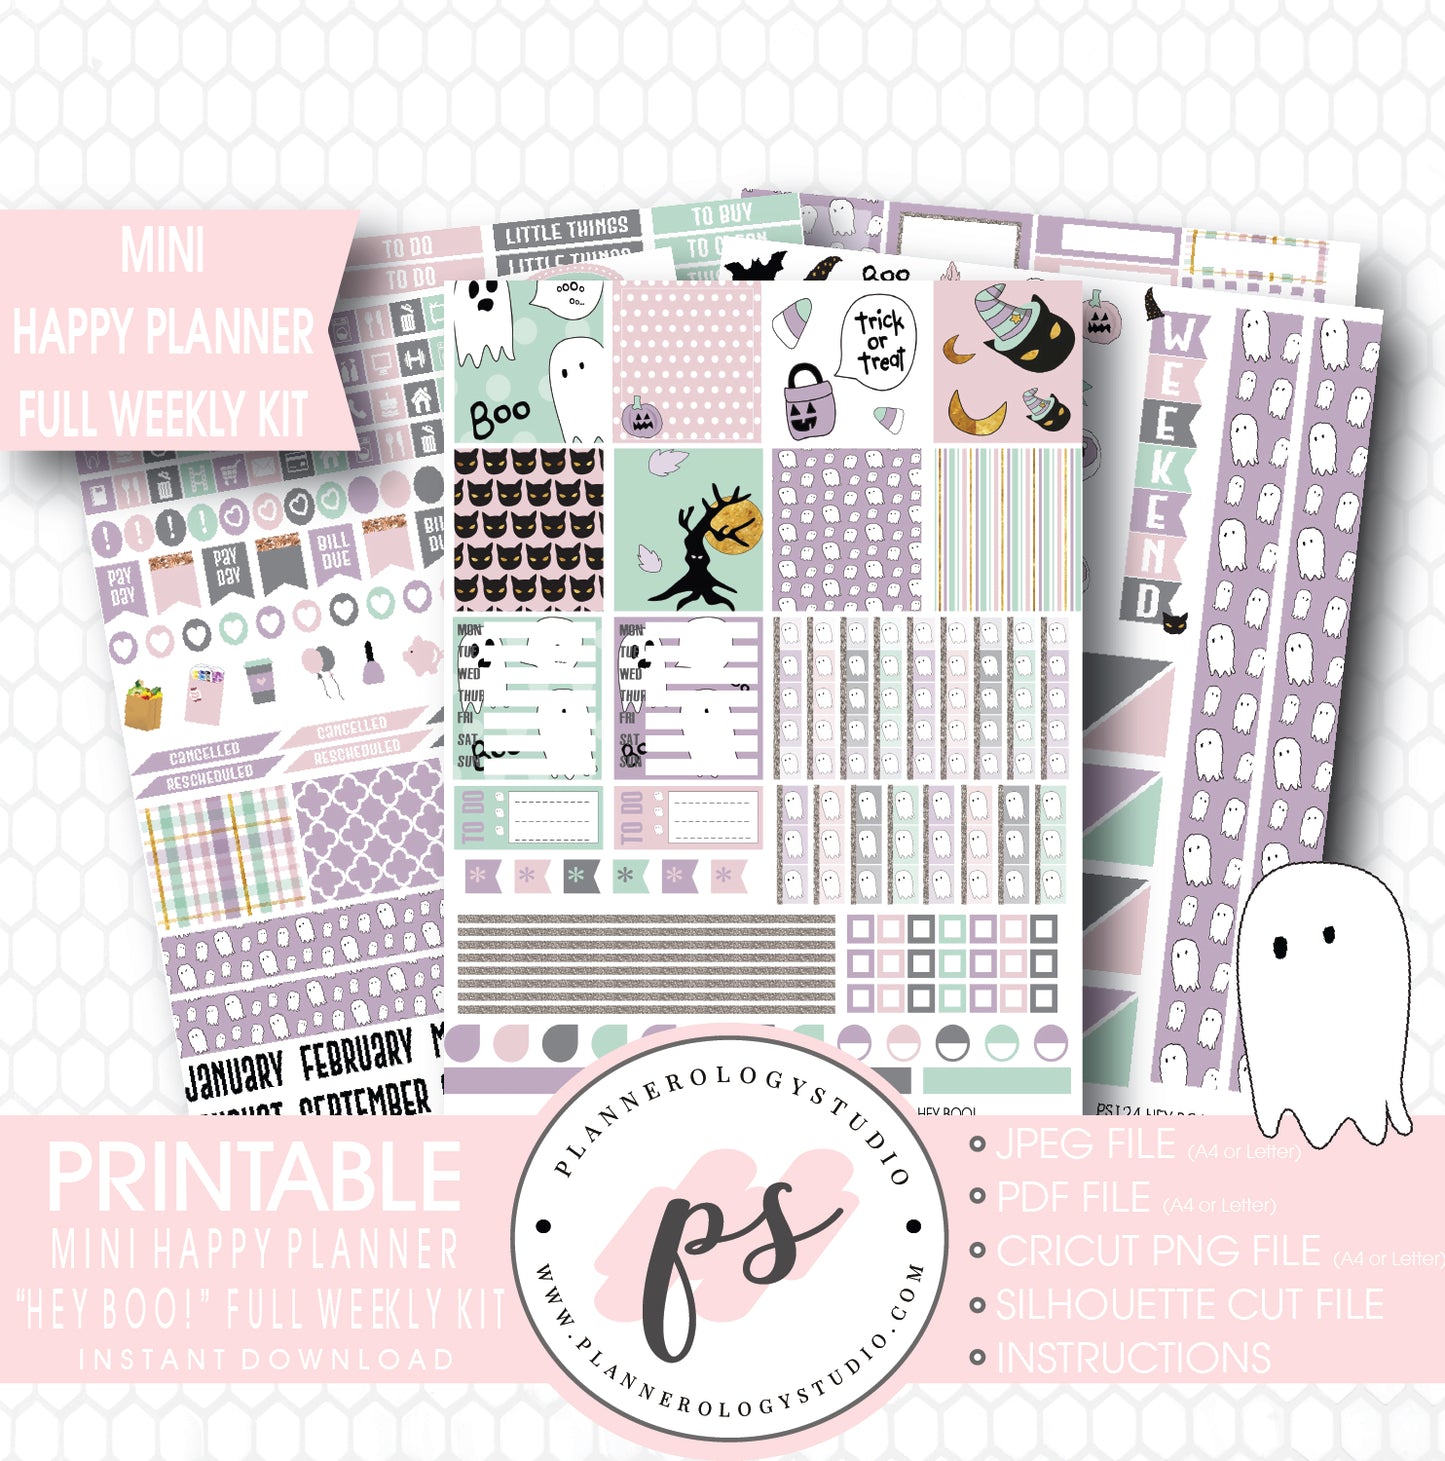 Hey Boo! Full Weekly Kit Printable Planner Stickers (for use with Mini Happy Planner) - Plannerologystudio